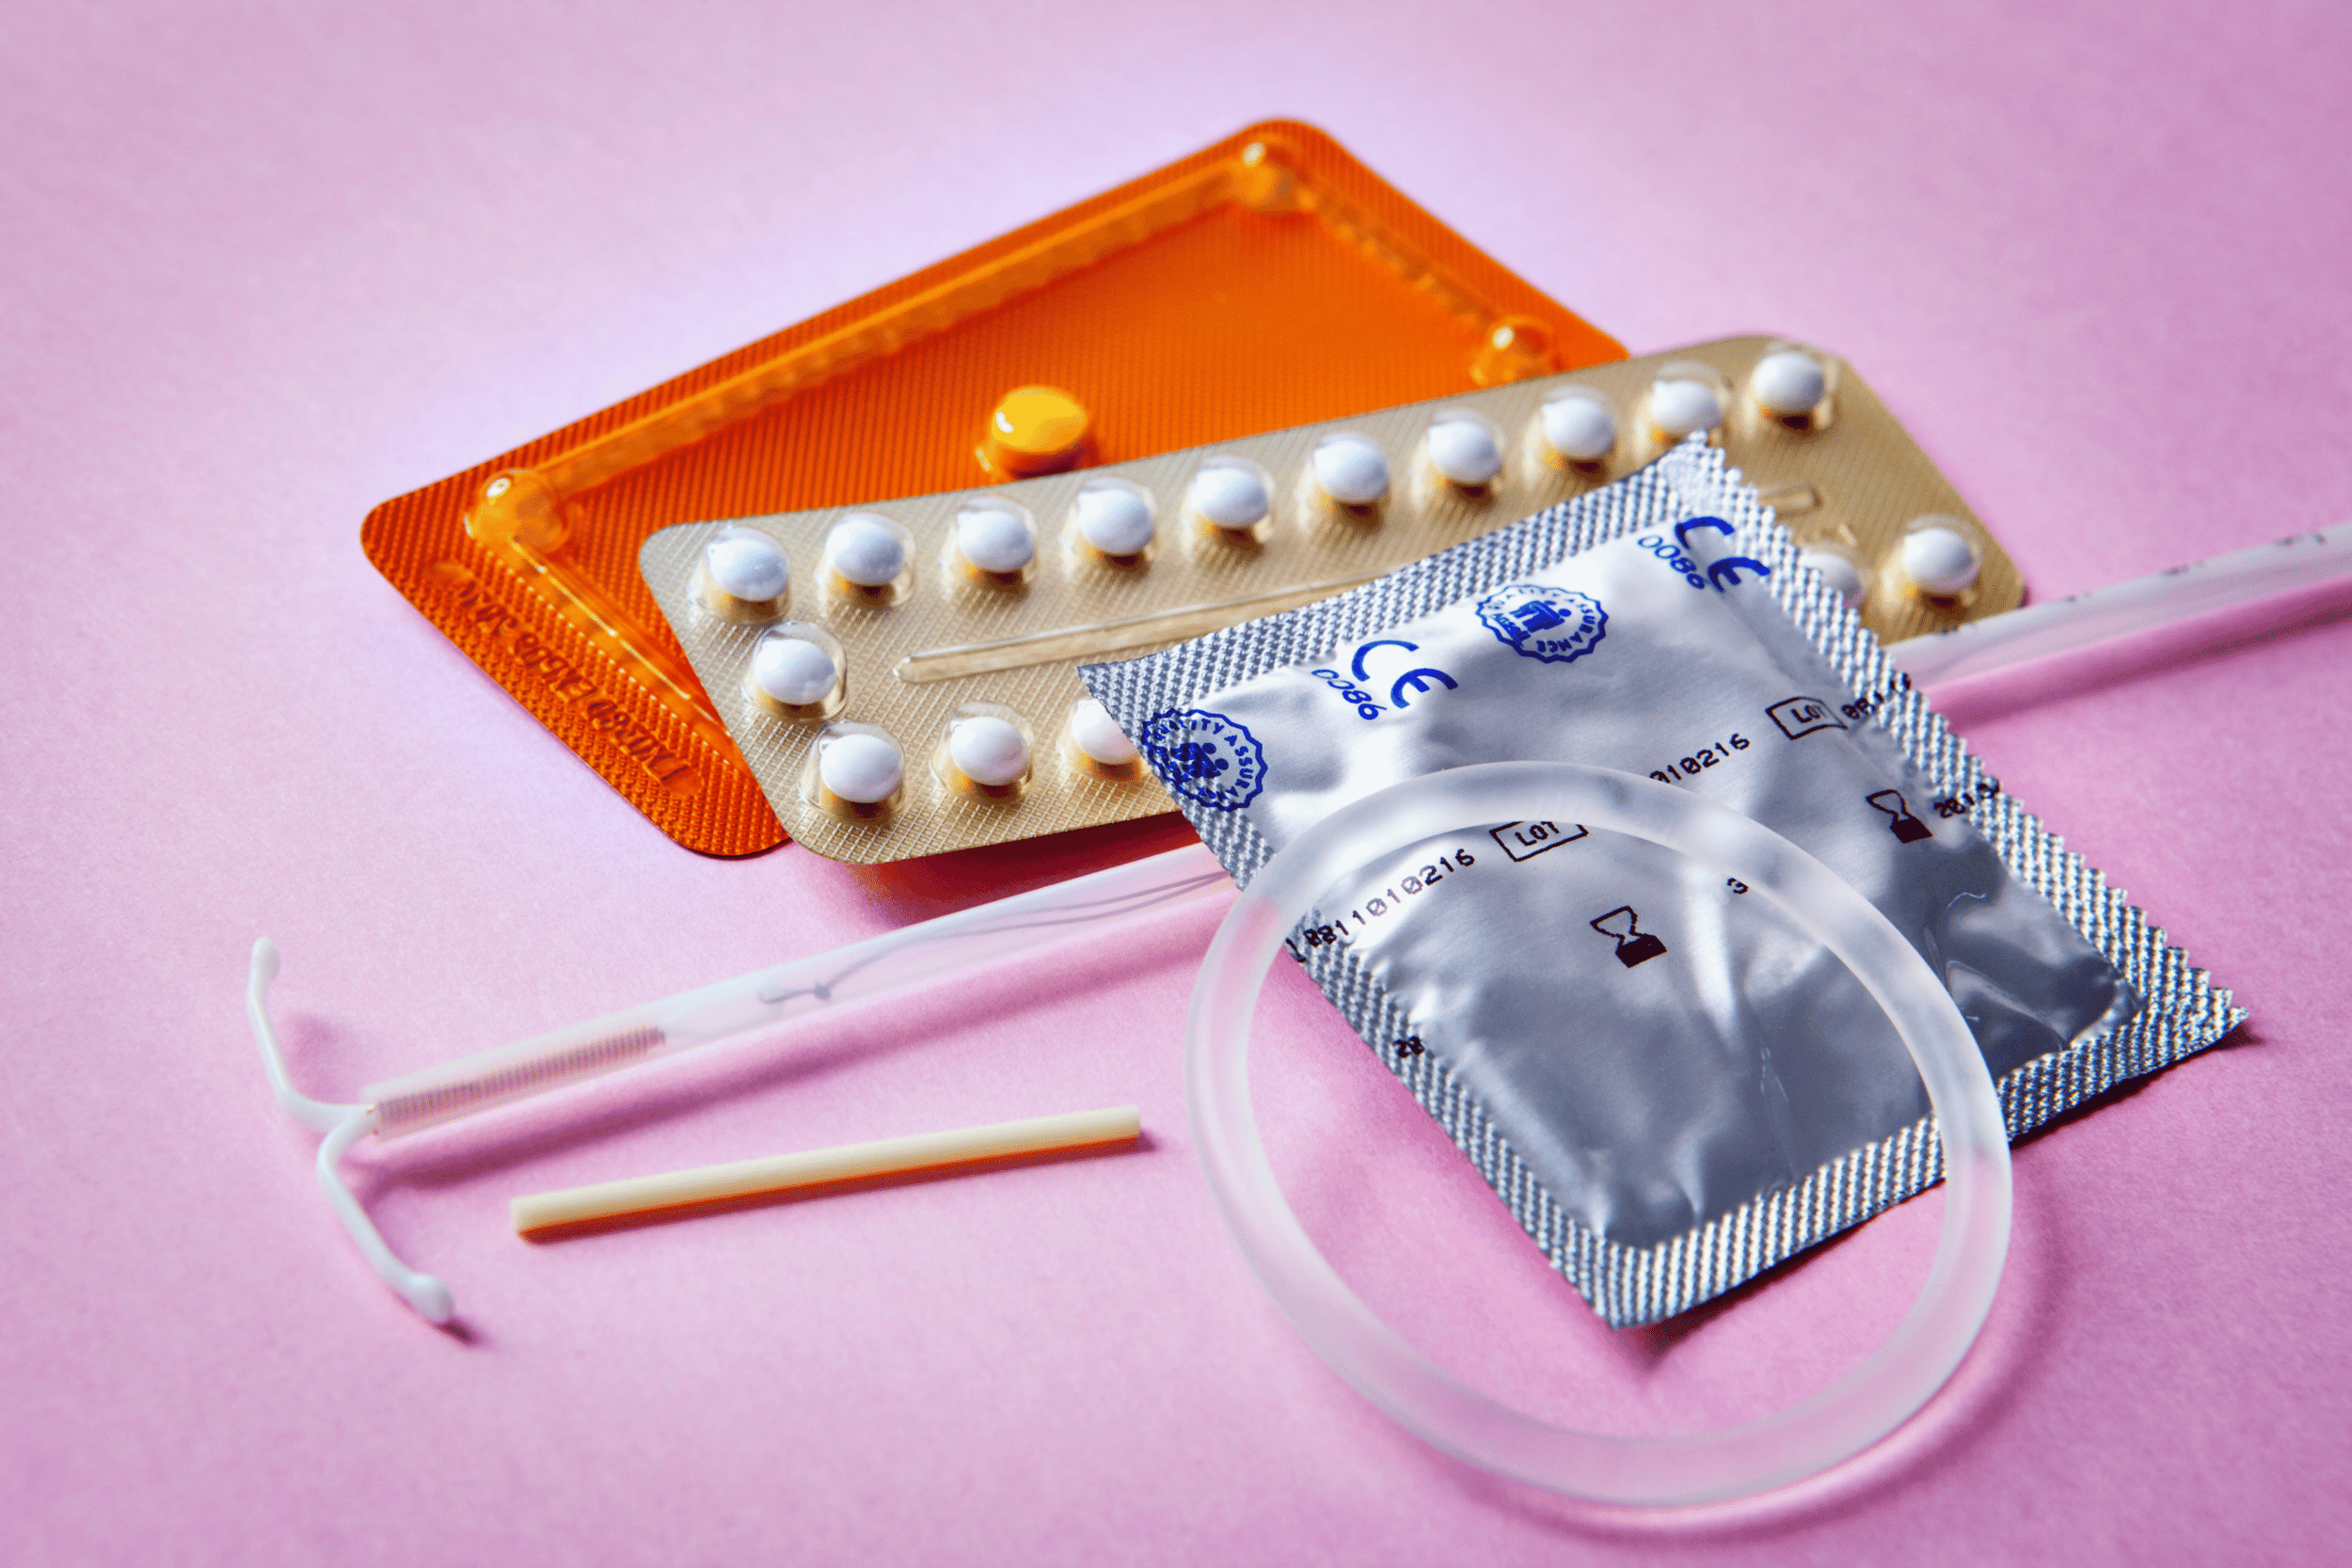 various birth control treatments and methods including pills, condom, and IUD